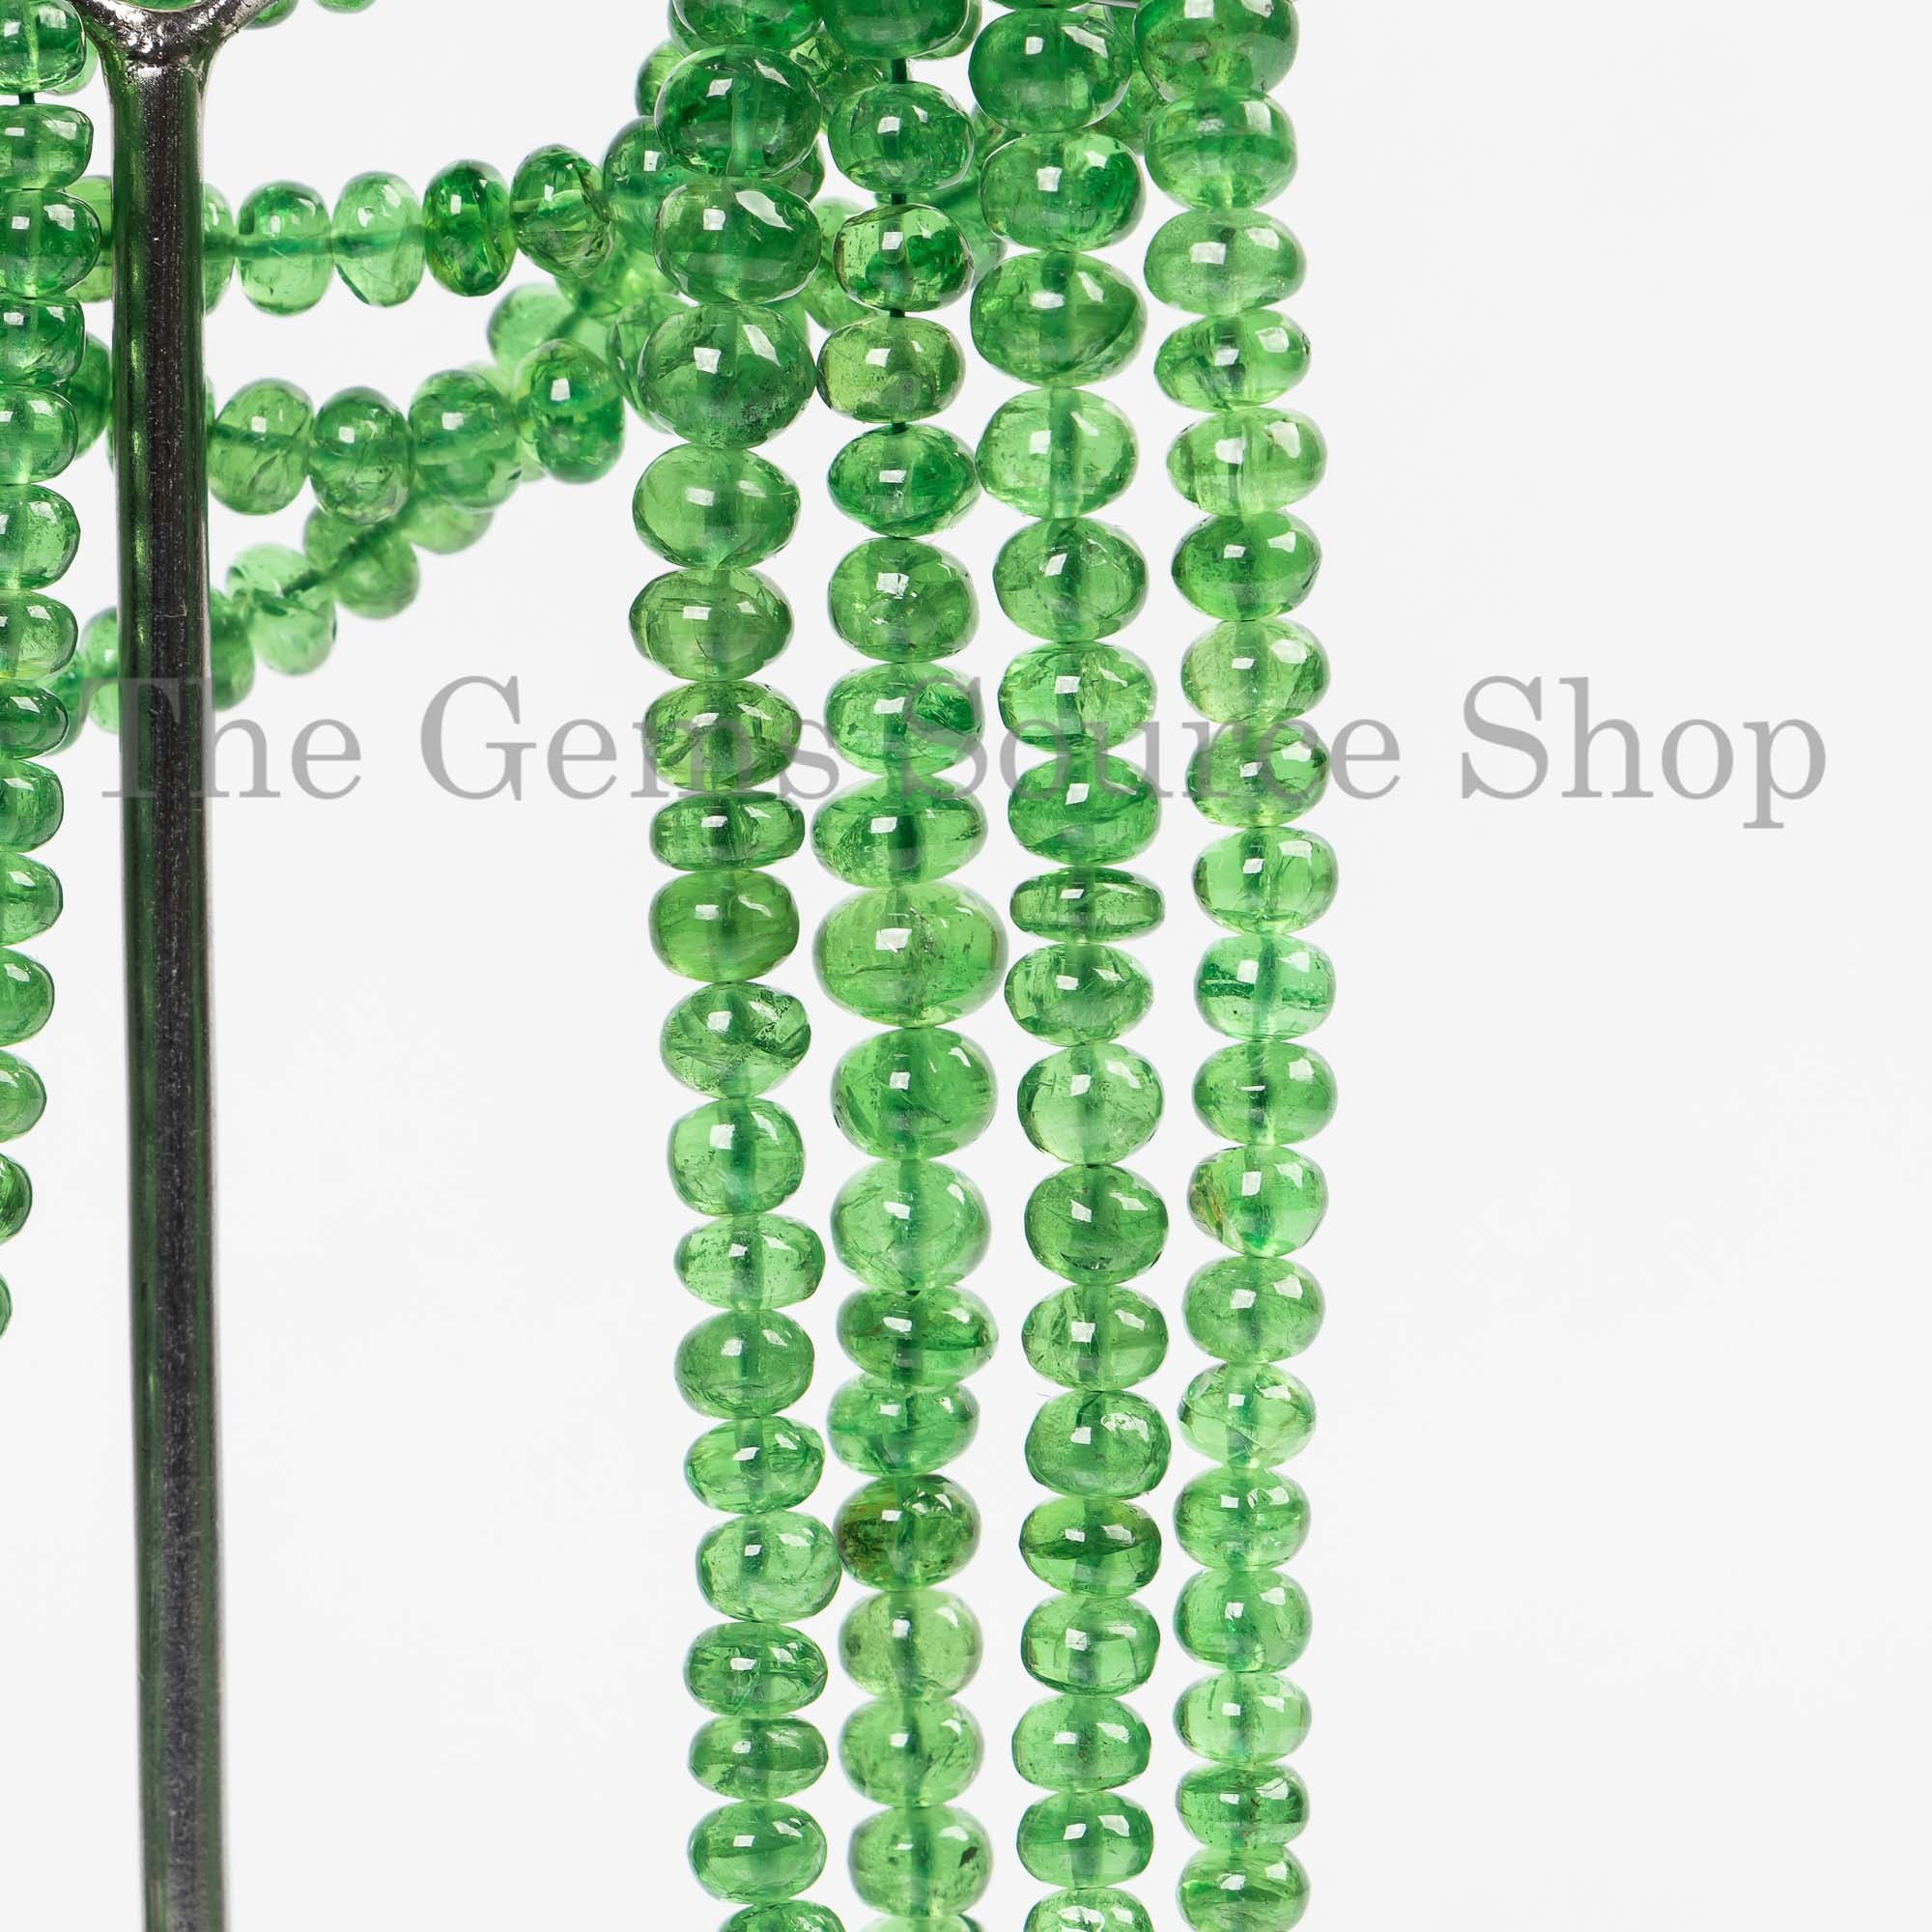 Top Quality Tsavorite Rondelle Beads, 3.5-6mm Tsavorite Beads, Tsavorite Plain Rondelle Beads, Tsavorite Smooth Beads, Beads For Jewelry